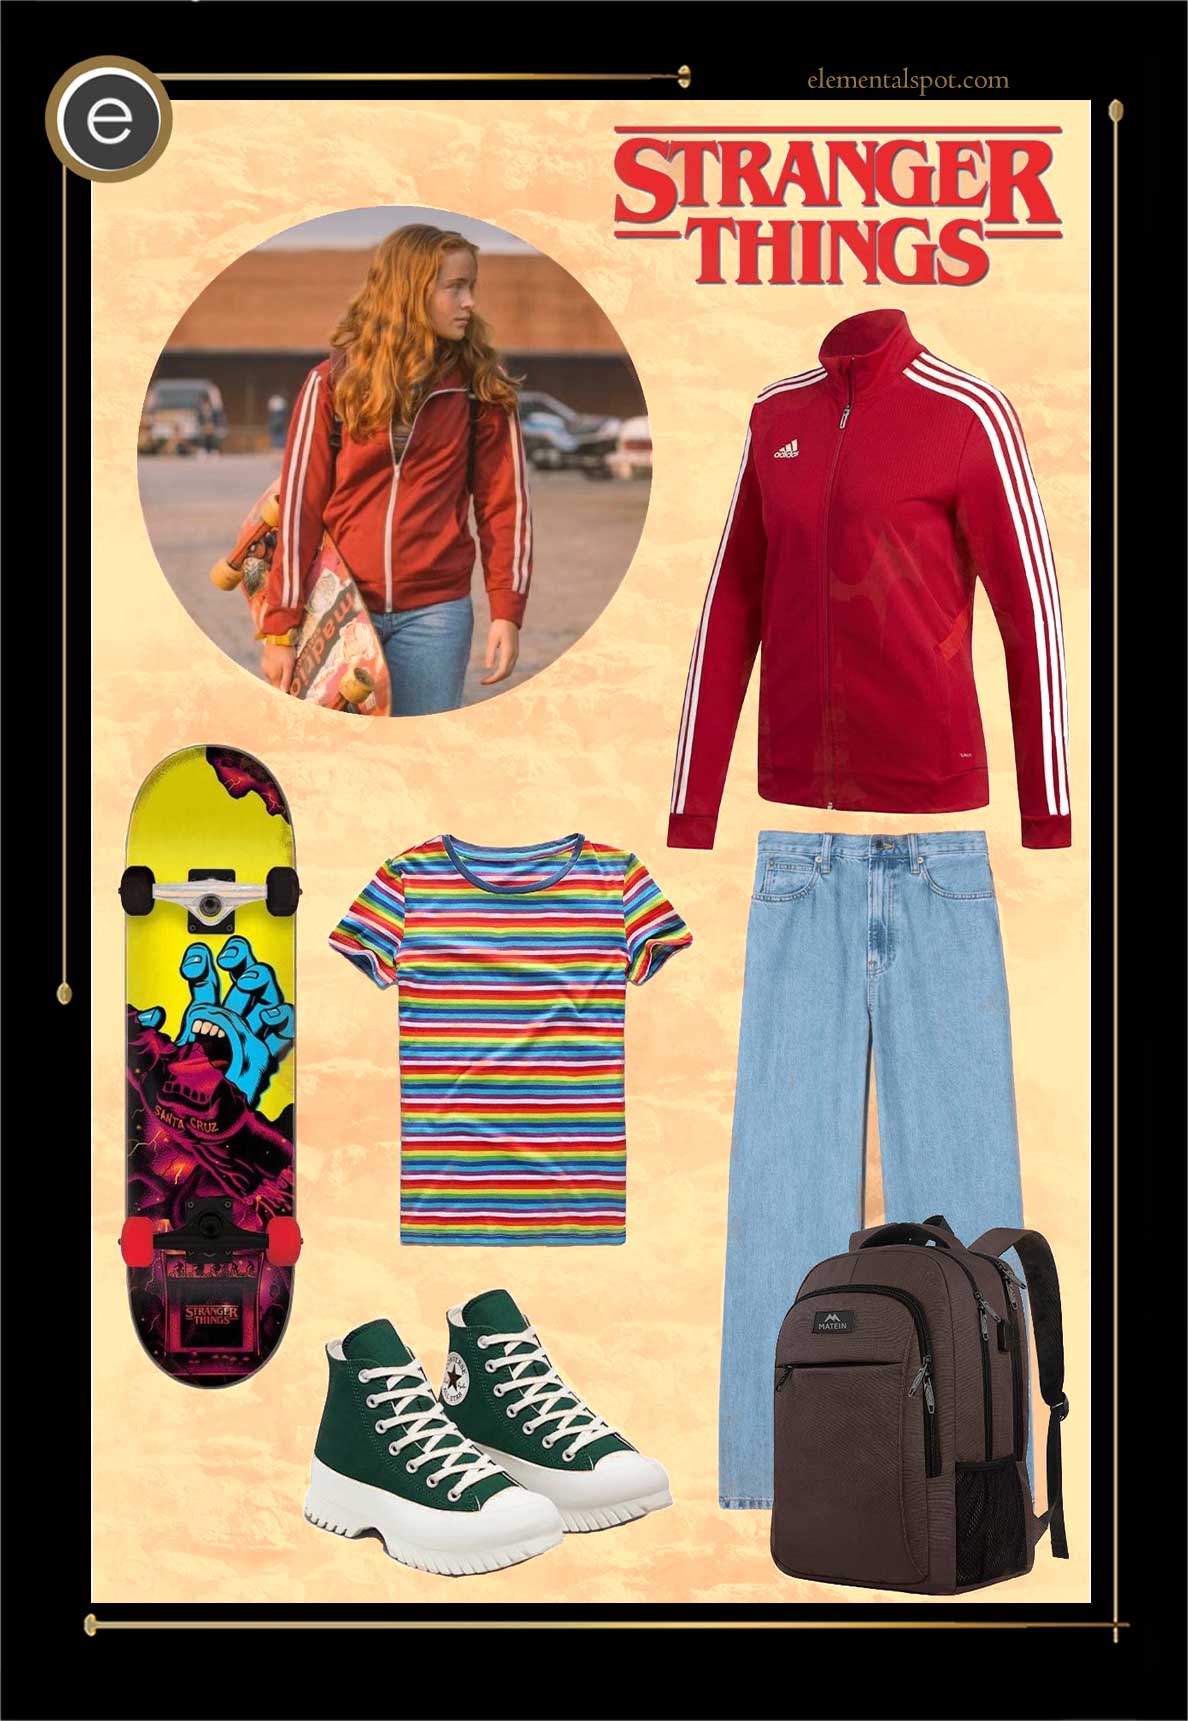 Steal the Look - Dress Like Max from Stranger Things - Elemental Spot